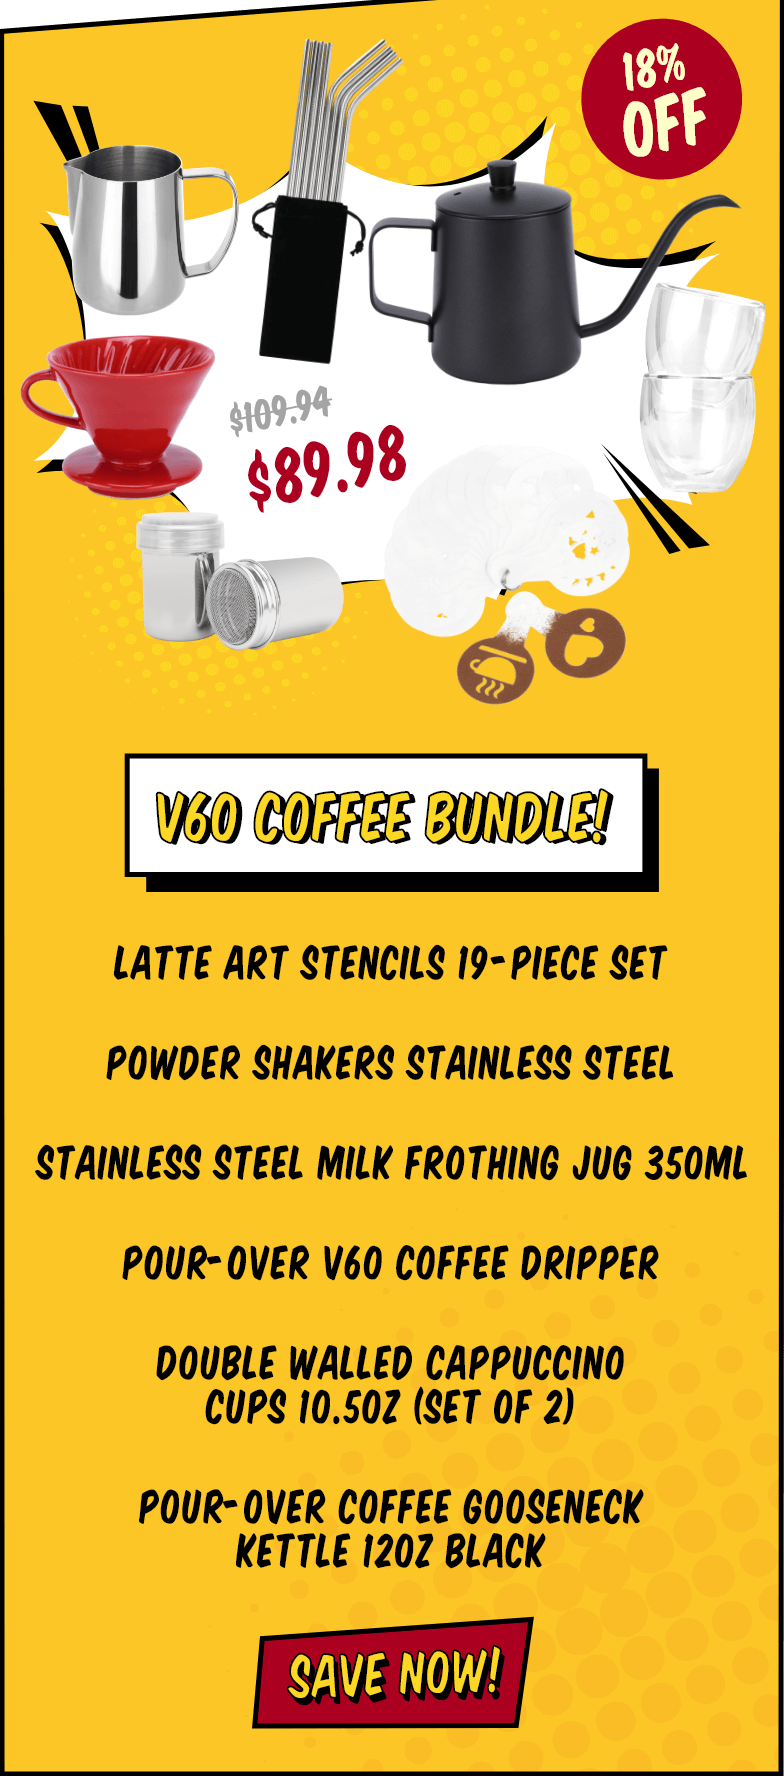 V60 Coffee Bundle with 10-Piece Reusable Steel Straws Set, 12oz Pour-Over Coffee Gooseneck Kettle in Black color, 2  Double Walled Cappuccino Cups set  at 10.5oz, 19-Piece Latte Art Stencils Set, Stainless Steel Powder Shakers, Pour-Over V60 Coffee Dripper, Stainless Steel Milk Frothing Jug at 350ml, Save now with 18% off! 